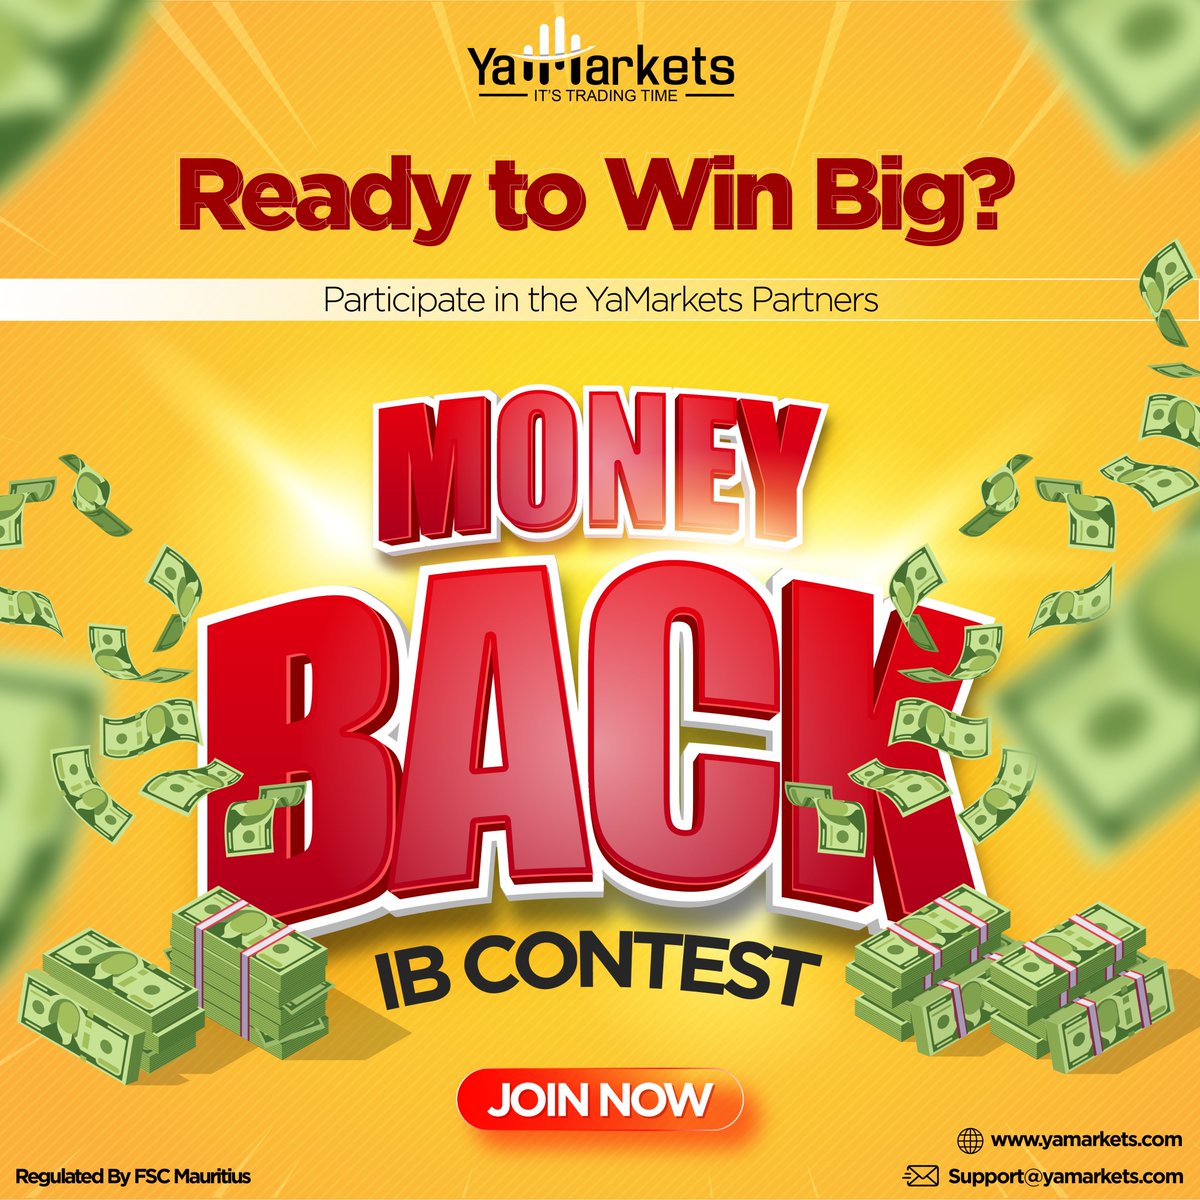 Are you ready to win big? Participate in the YaMarketsPartners Money-Back IB Contest and stand a chance to win exciting prizes! 
#YAMarkets #MoneyBackIB #Contest #PartnershipOpportunity #WinBig #Yamarkets #TradeSmart #JoinToday #tradablebonus